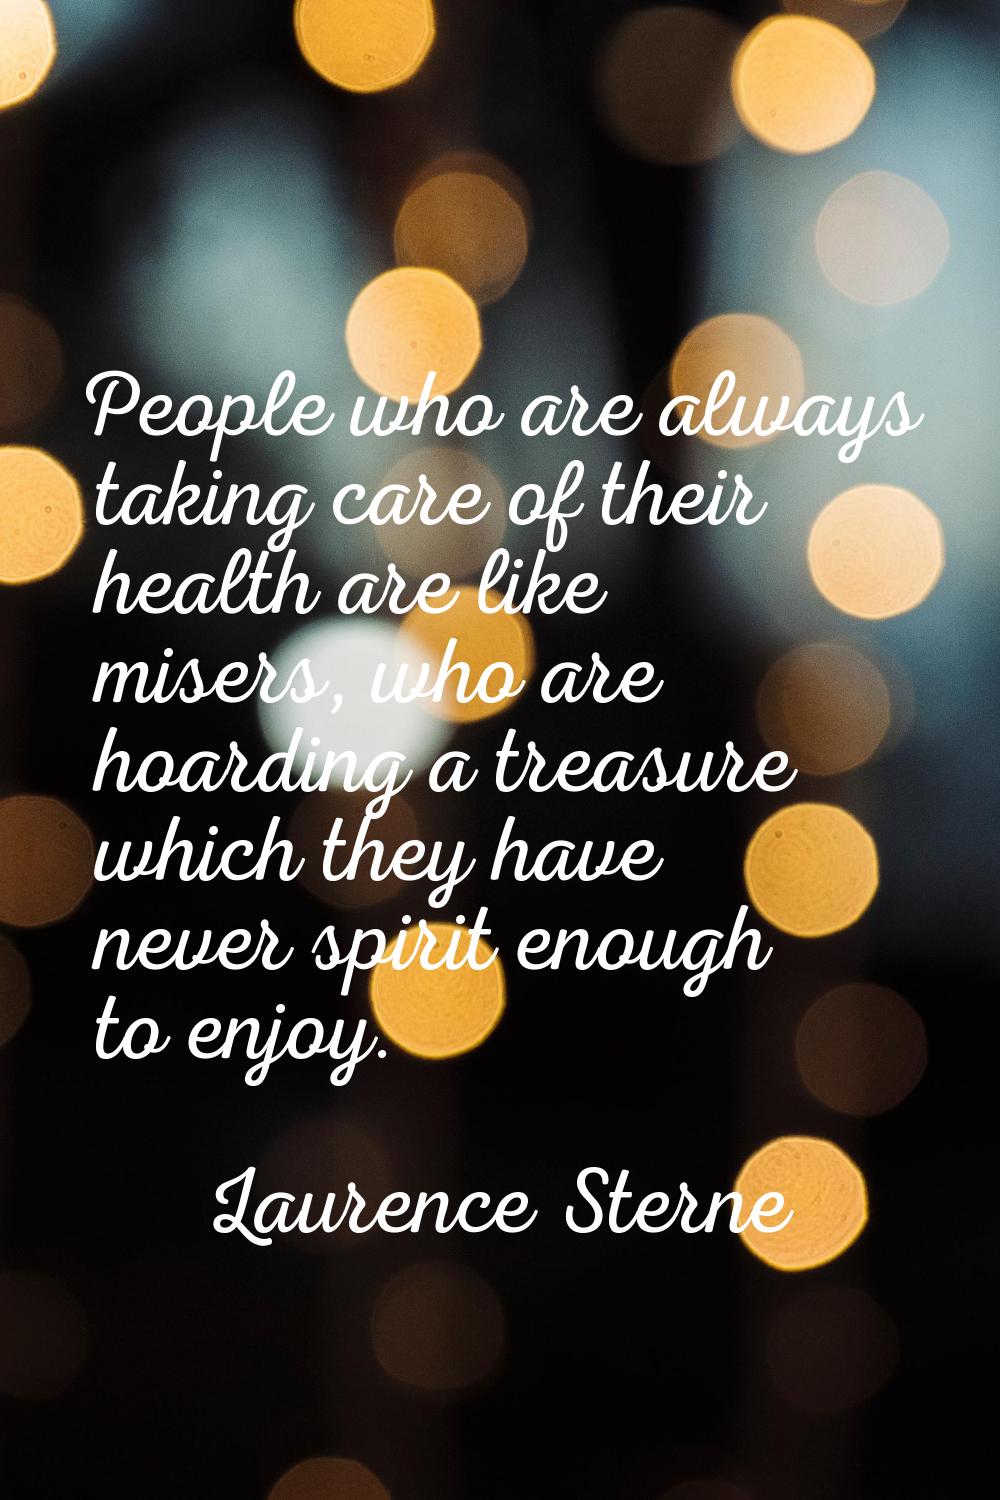 People who are always taking care of their health are like misers, who are hoarding a treasure whic